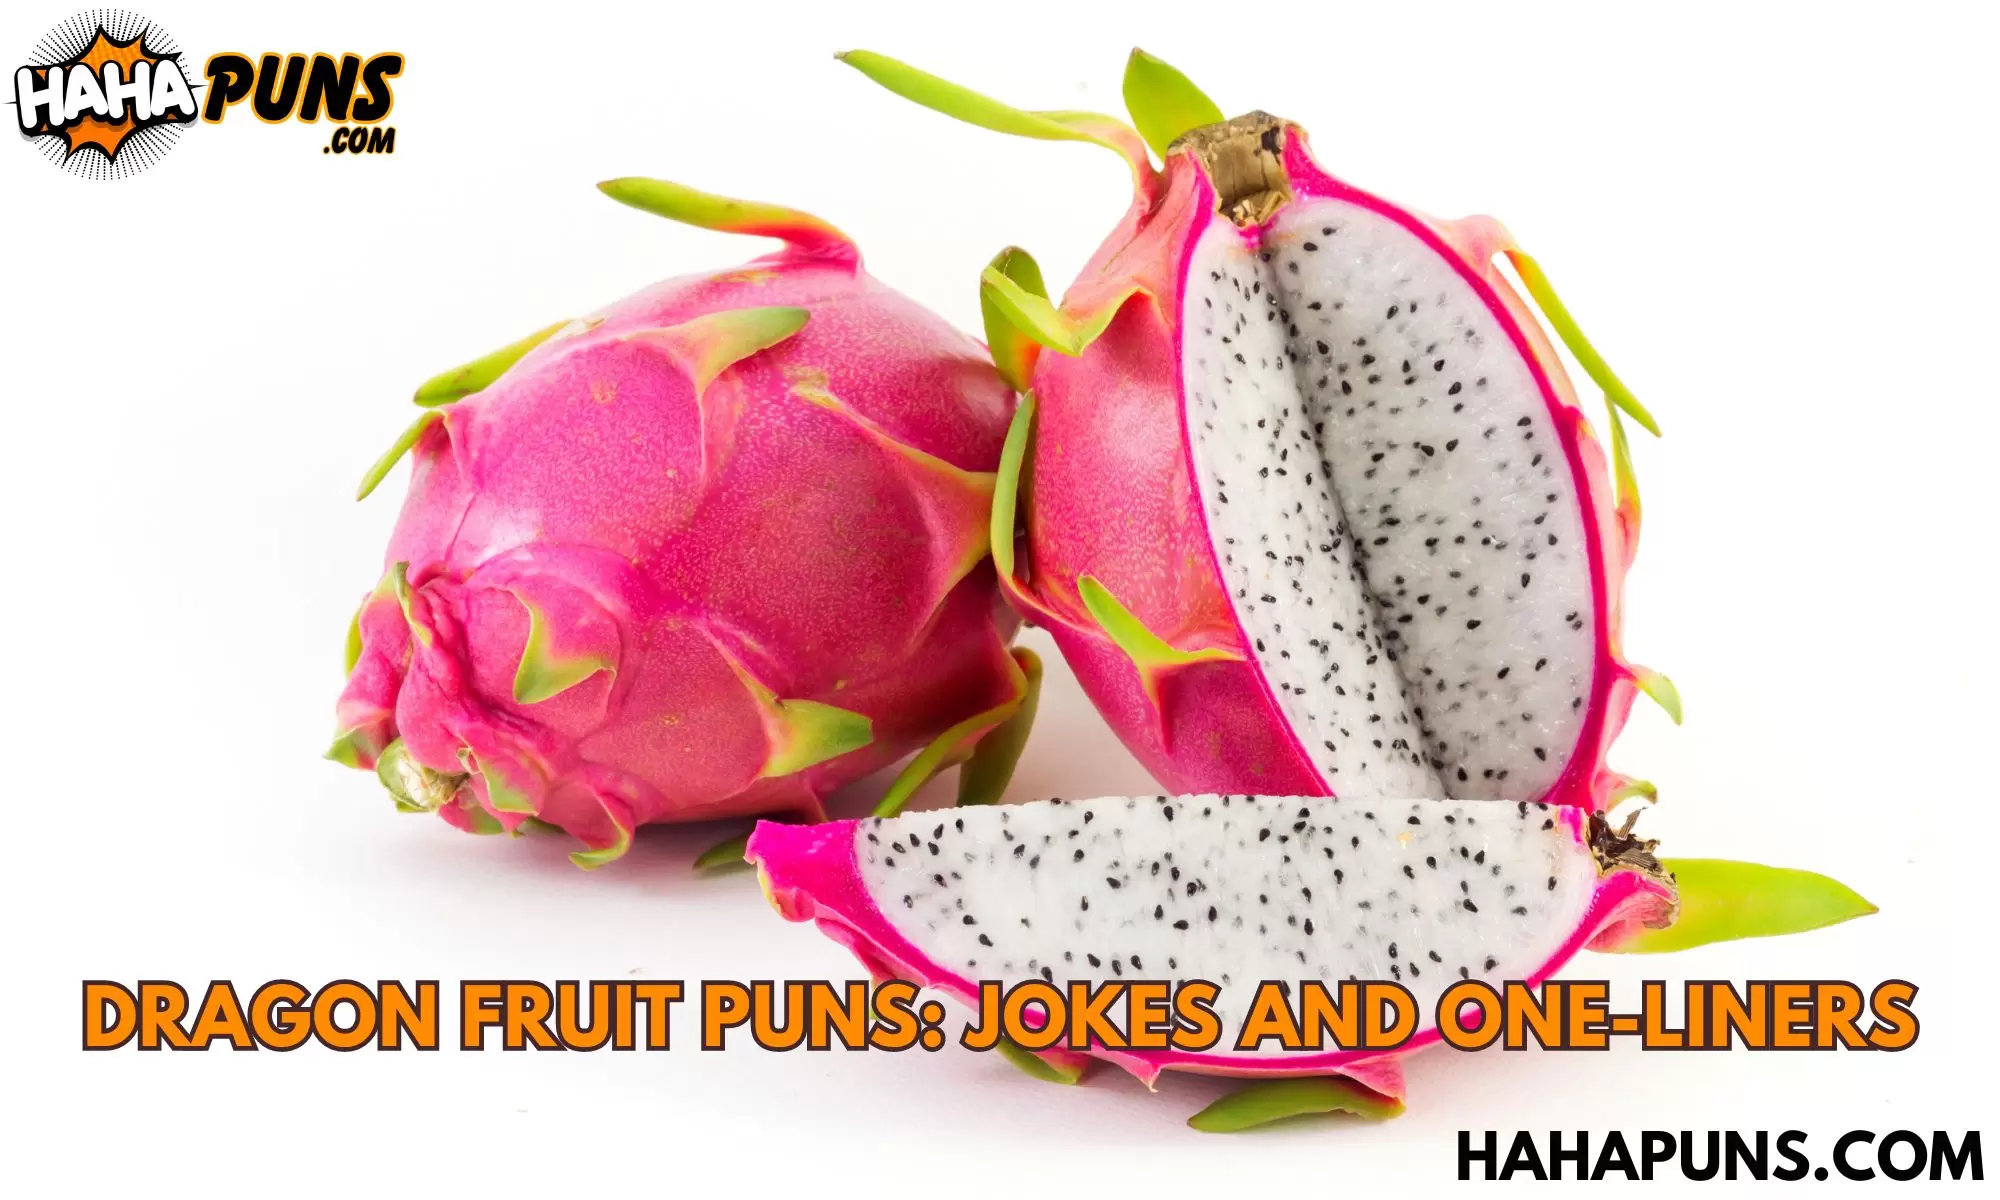 Dragon Fruit Puns: Jokes and One-Liners